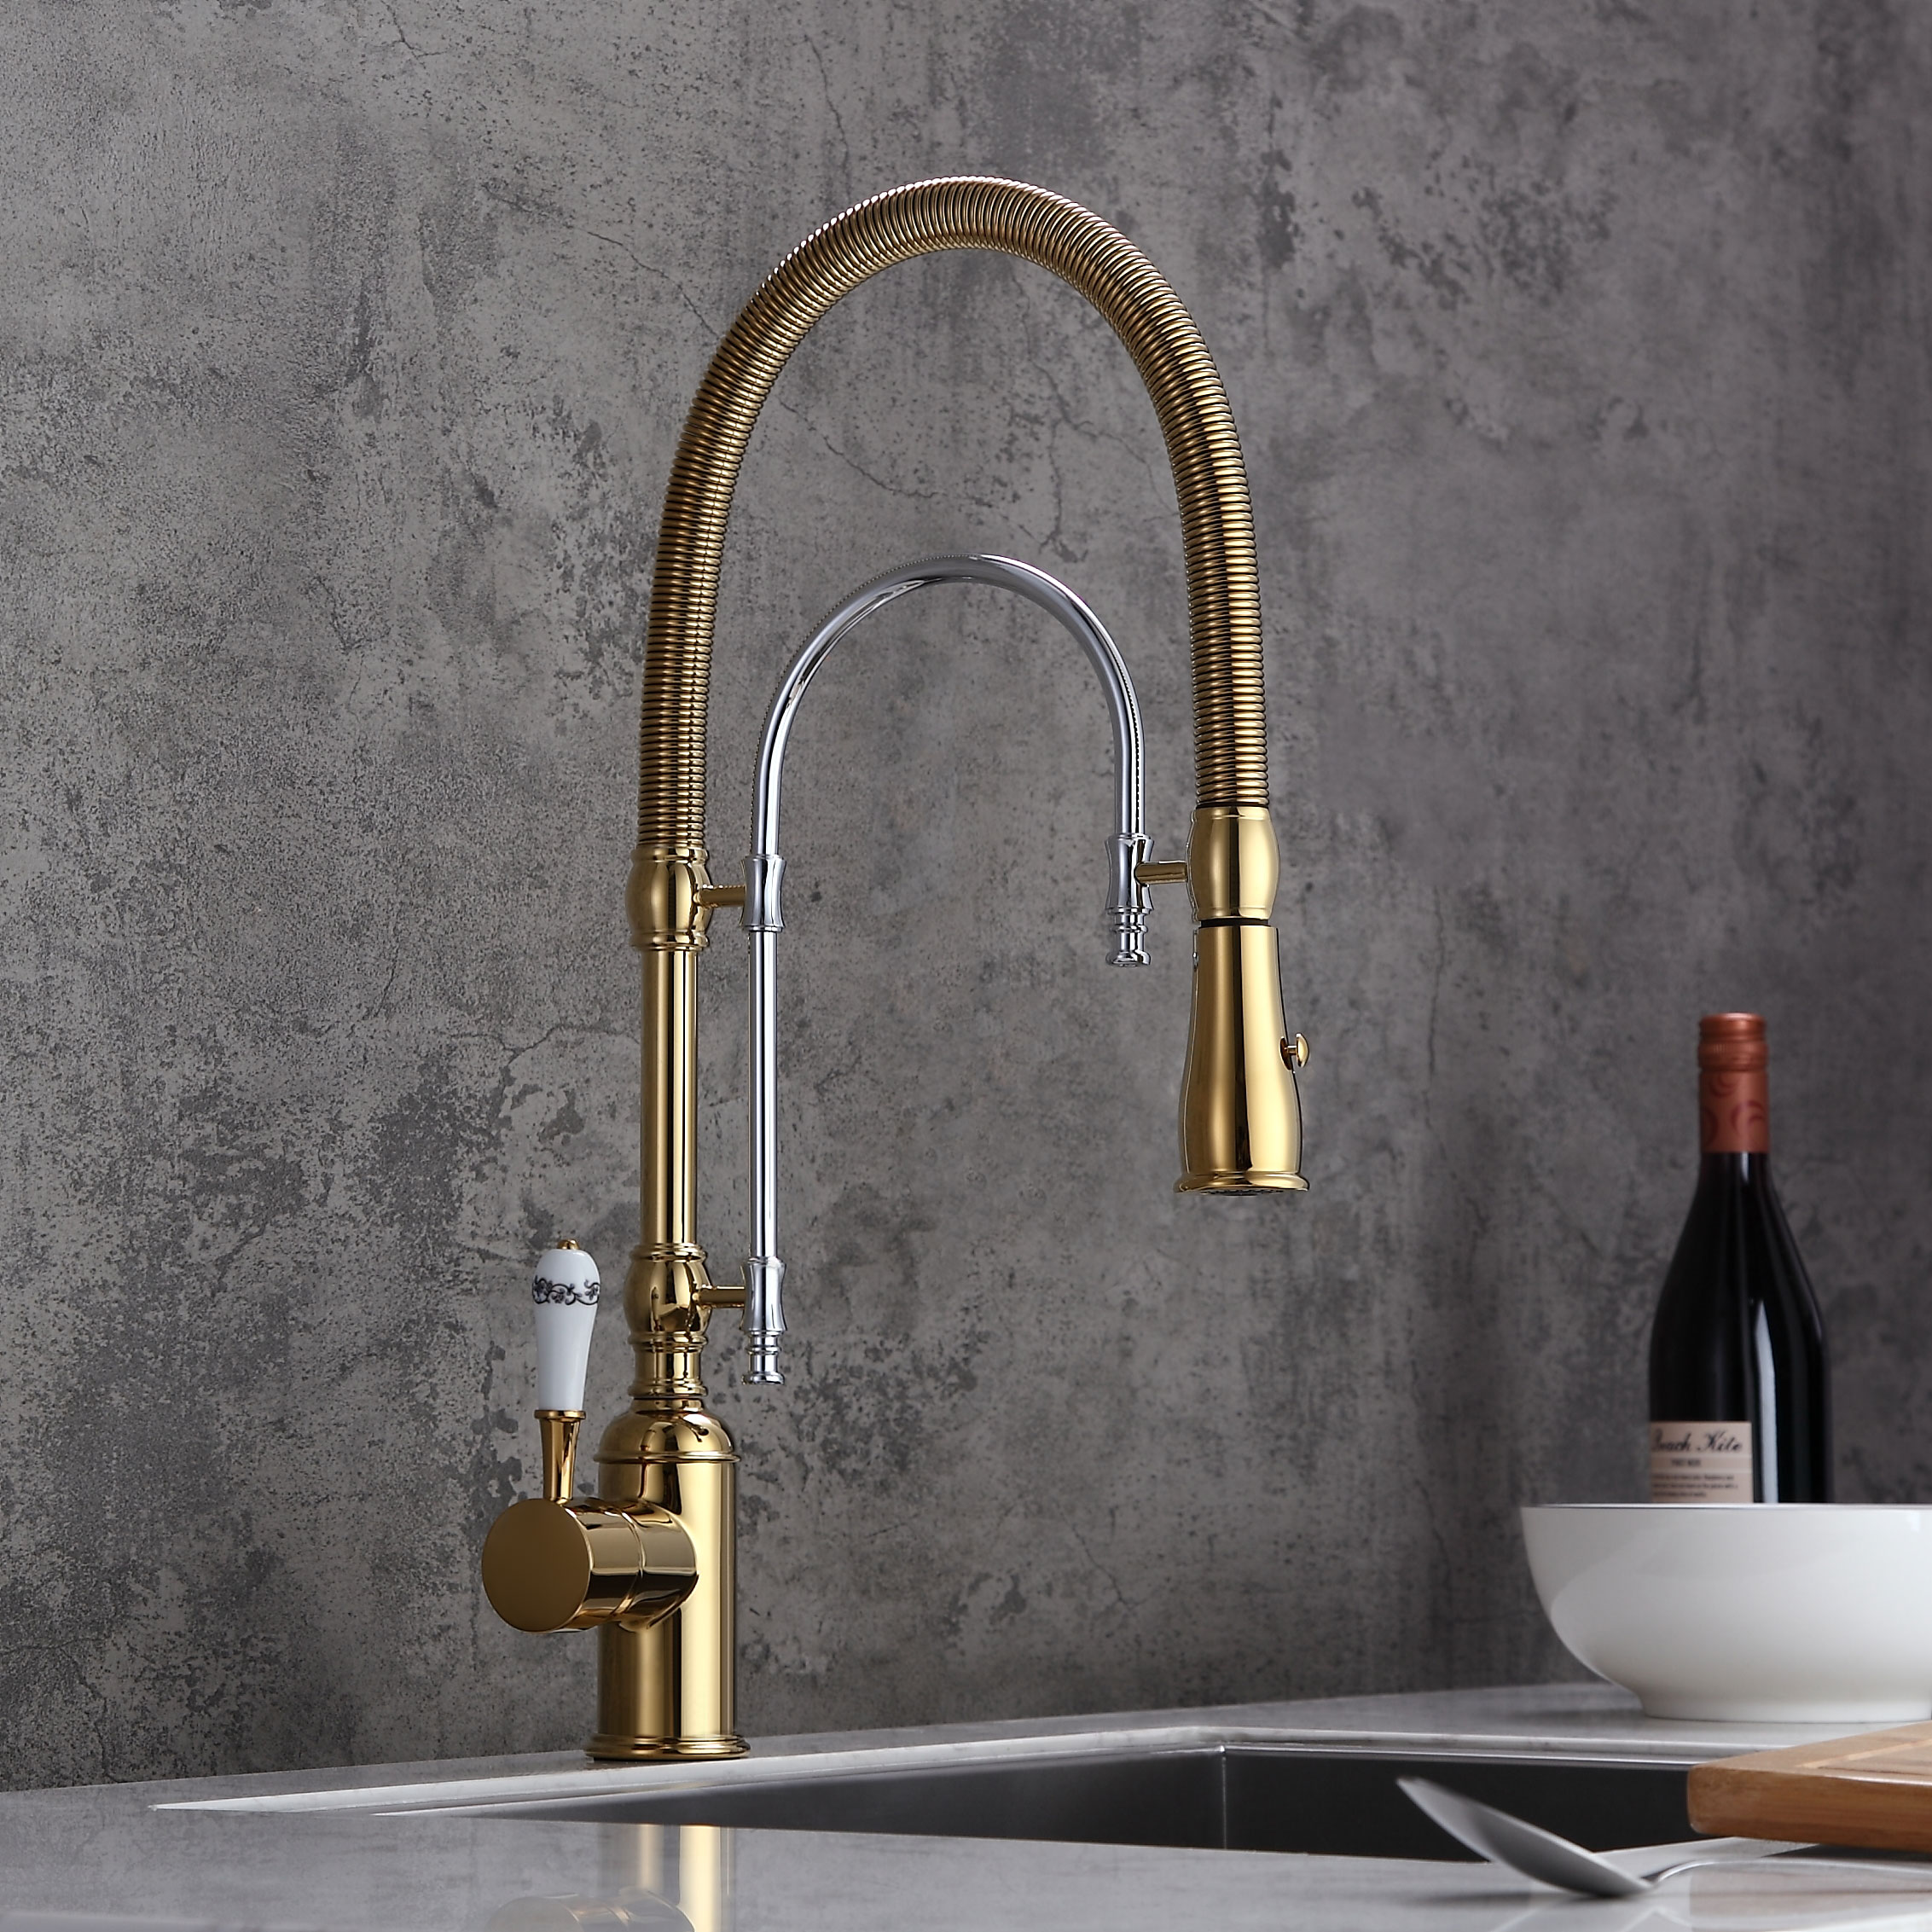 Commercial High Arc Pull Down Kitchen Faucet Soild Brass Single Handle Mixer Tap